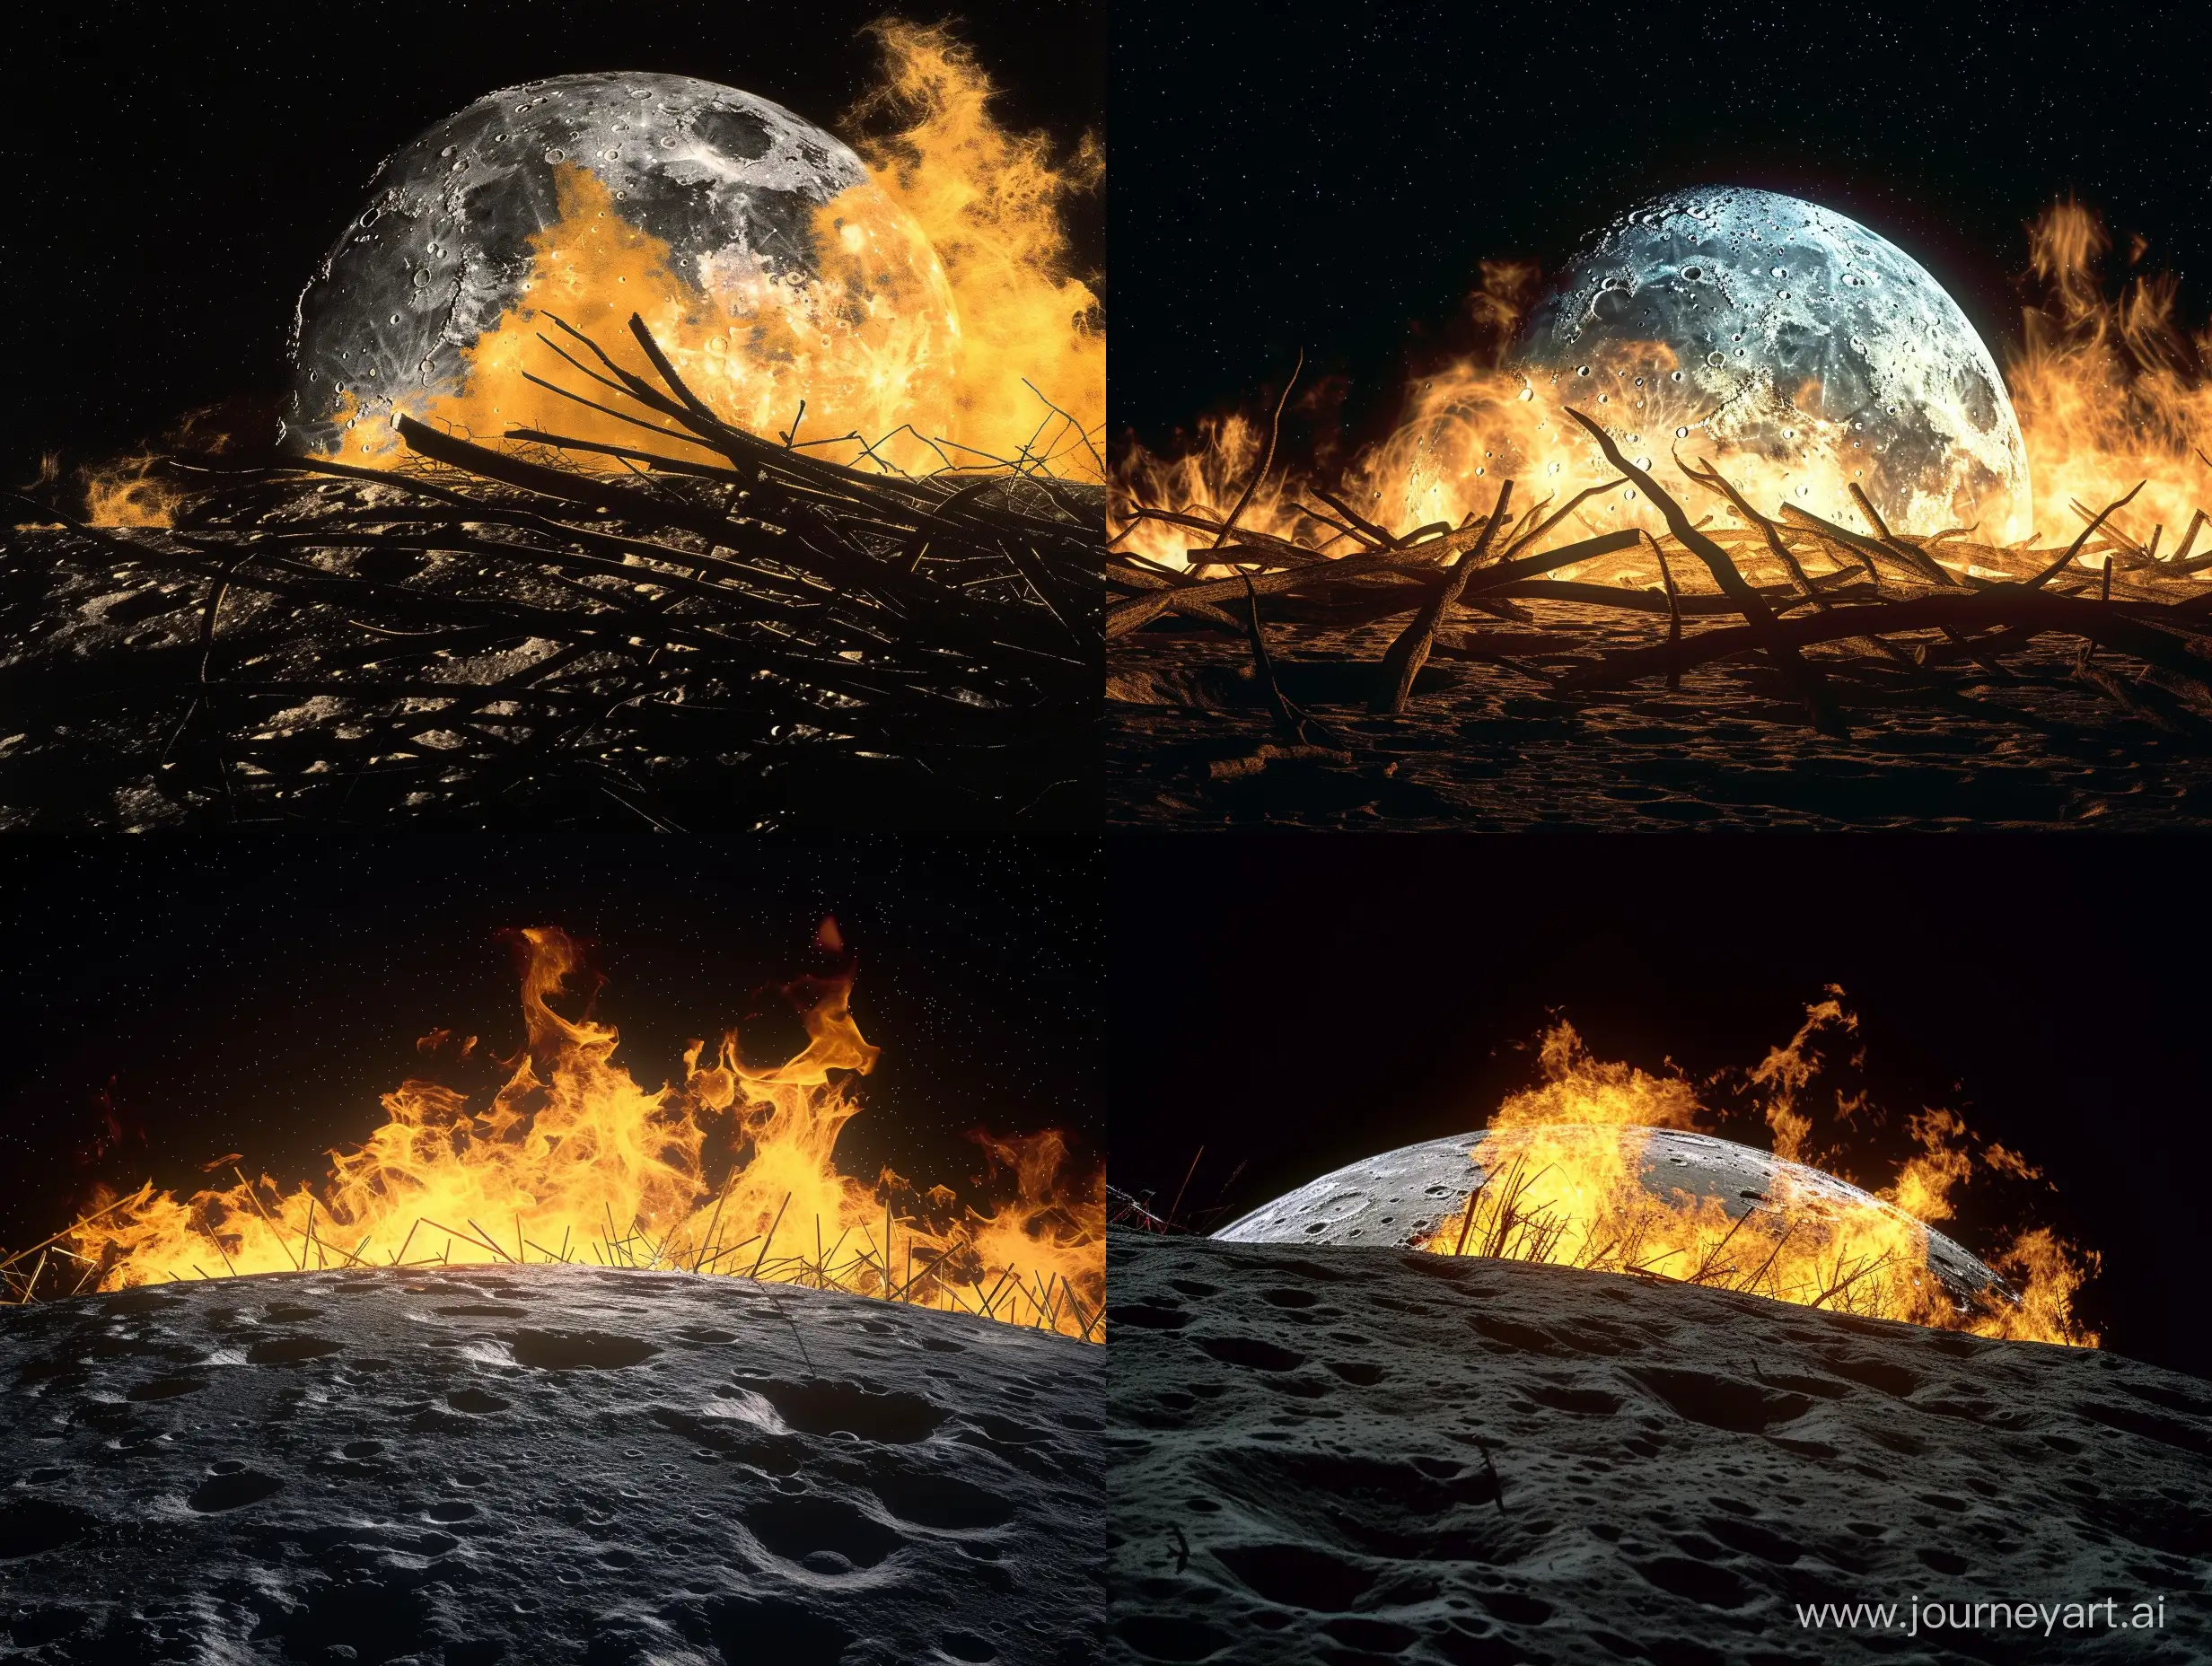 https://upload.wikimedia.org/wikipedia/commons/3/36/Large_bonfire.jpg, create an image like this, but on the moon and zoomed out —stylize 250